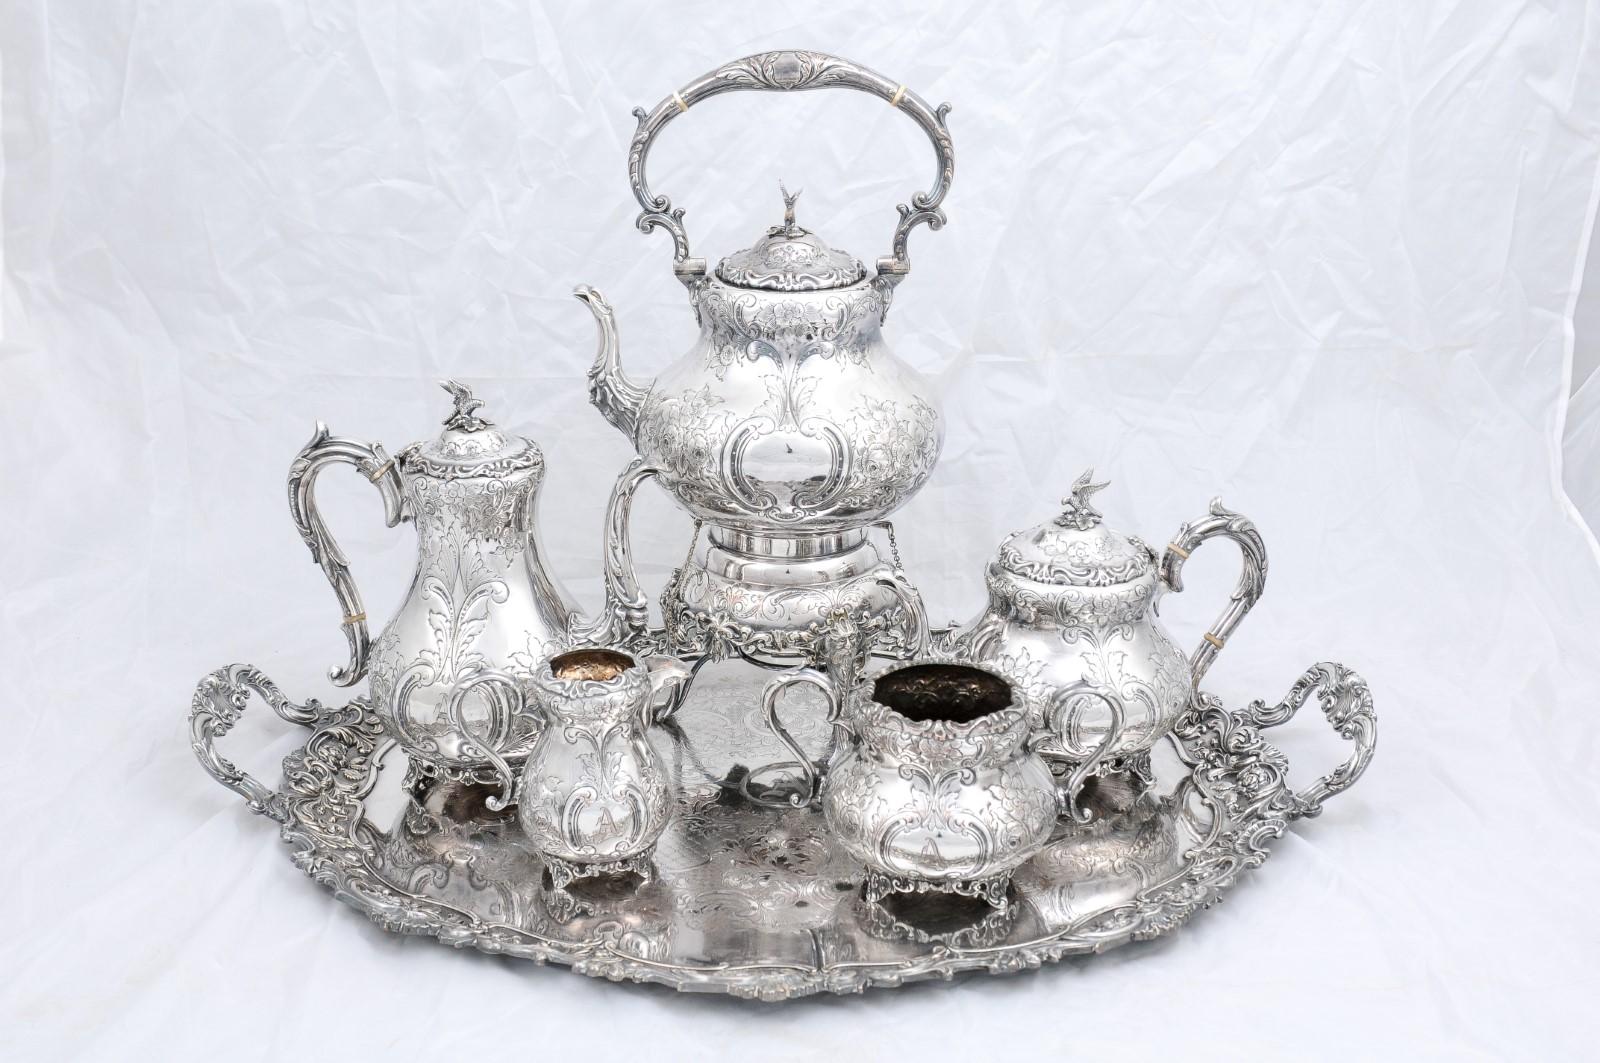 A Victorian period five-piece English silver tea and coffee set from the 19th century with tray. Created in England during the reign of Queen Victoria, this silver tea and coffee set features a spirit kettle (teapot resting on a burner), a coffee